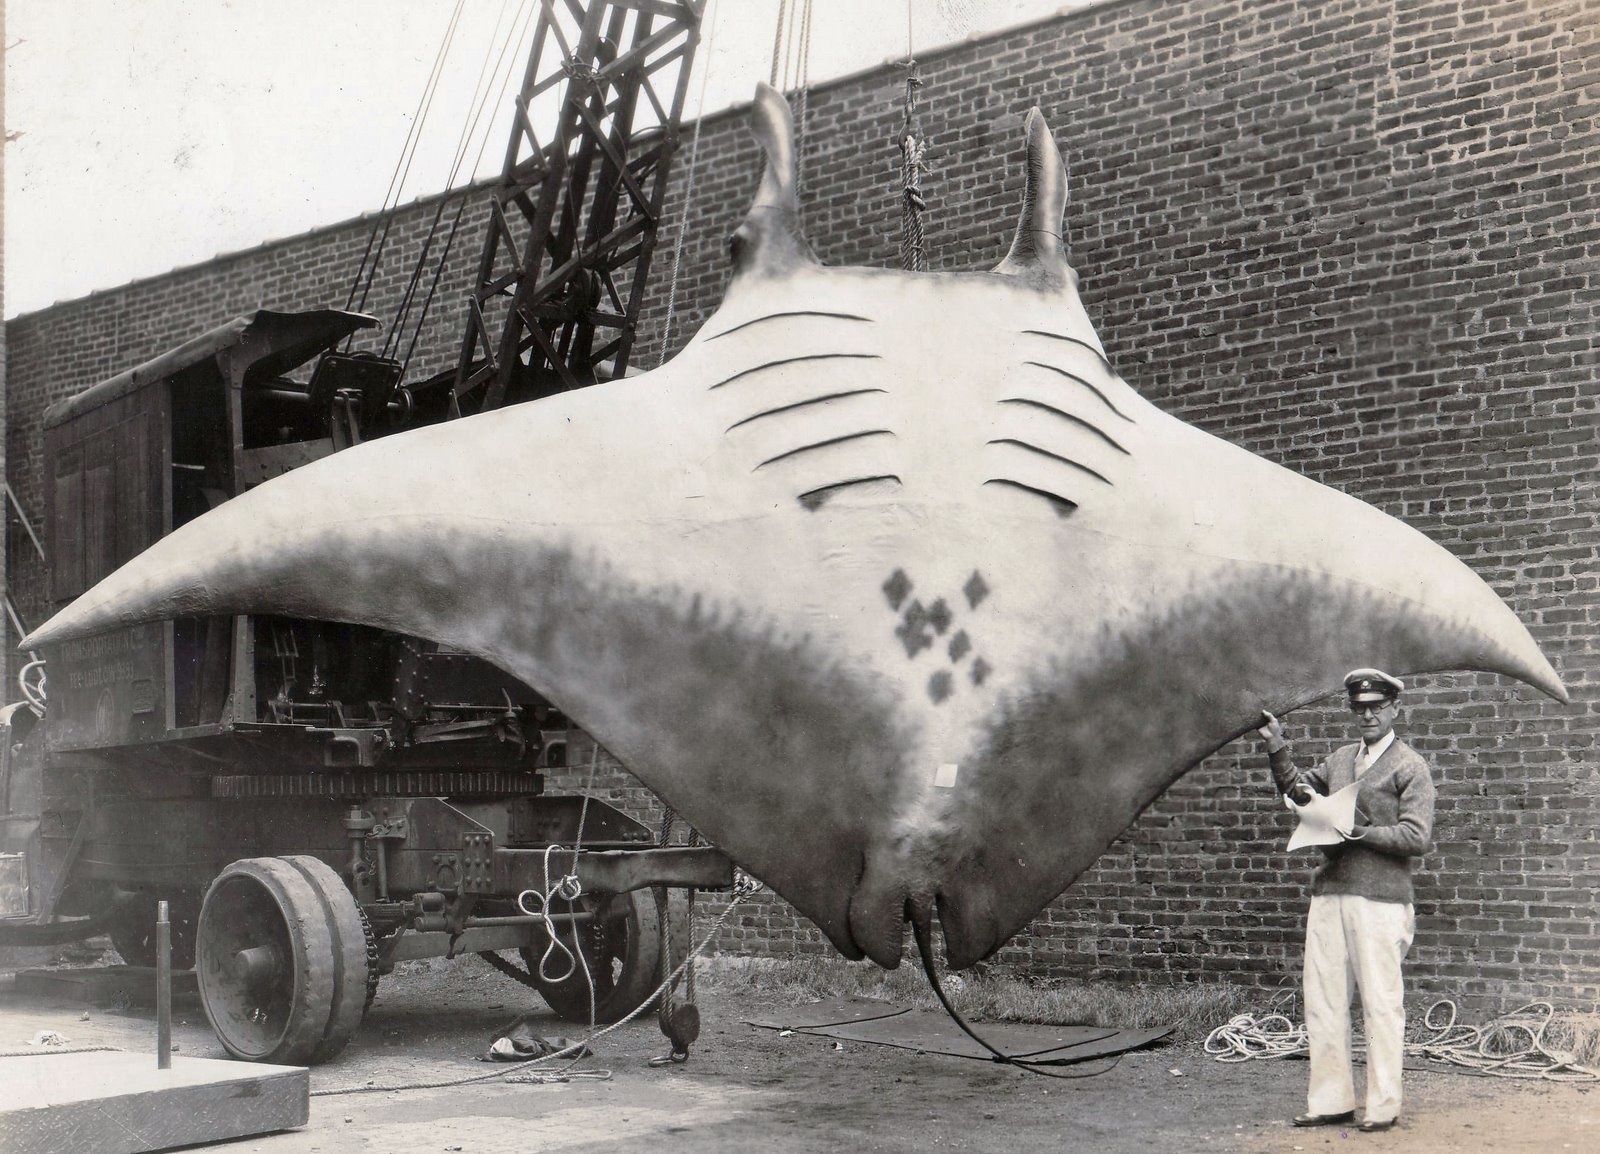 A 20-foot-wide, 5,000-pound Manta Ray known as the Great Manta, caught off the coast of New Jersey in 1933.